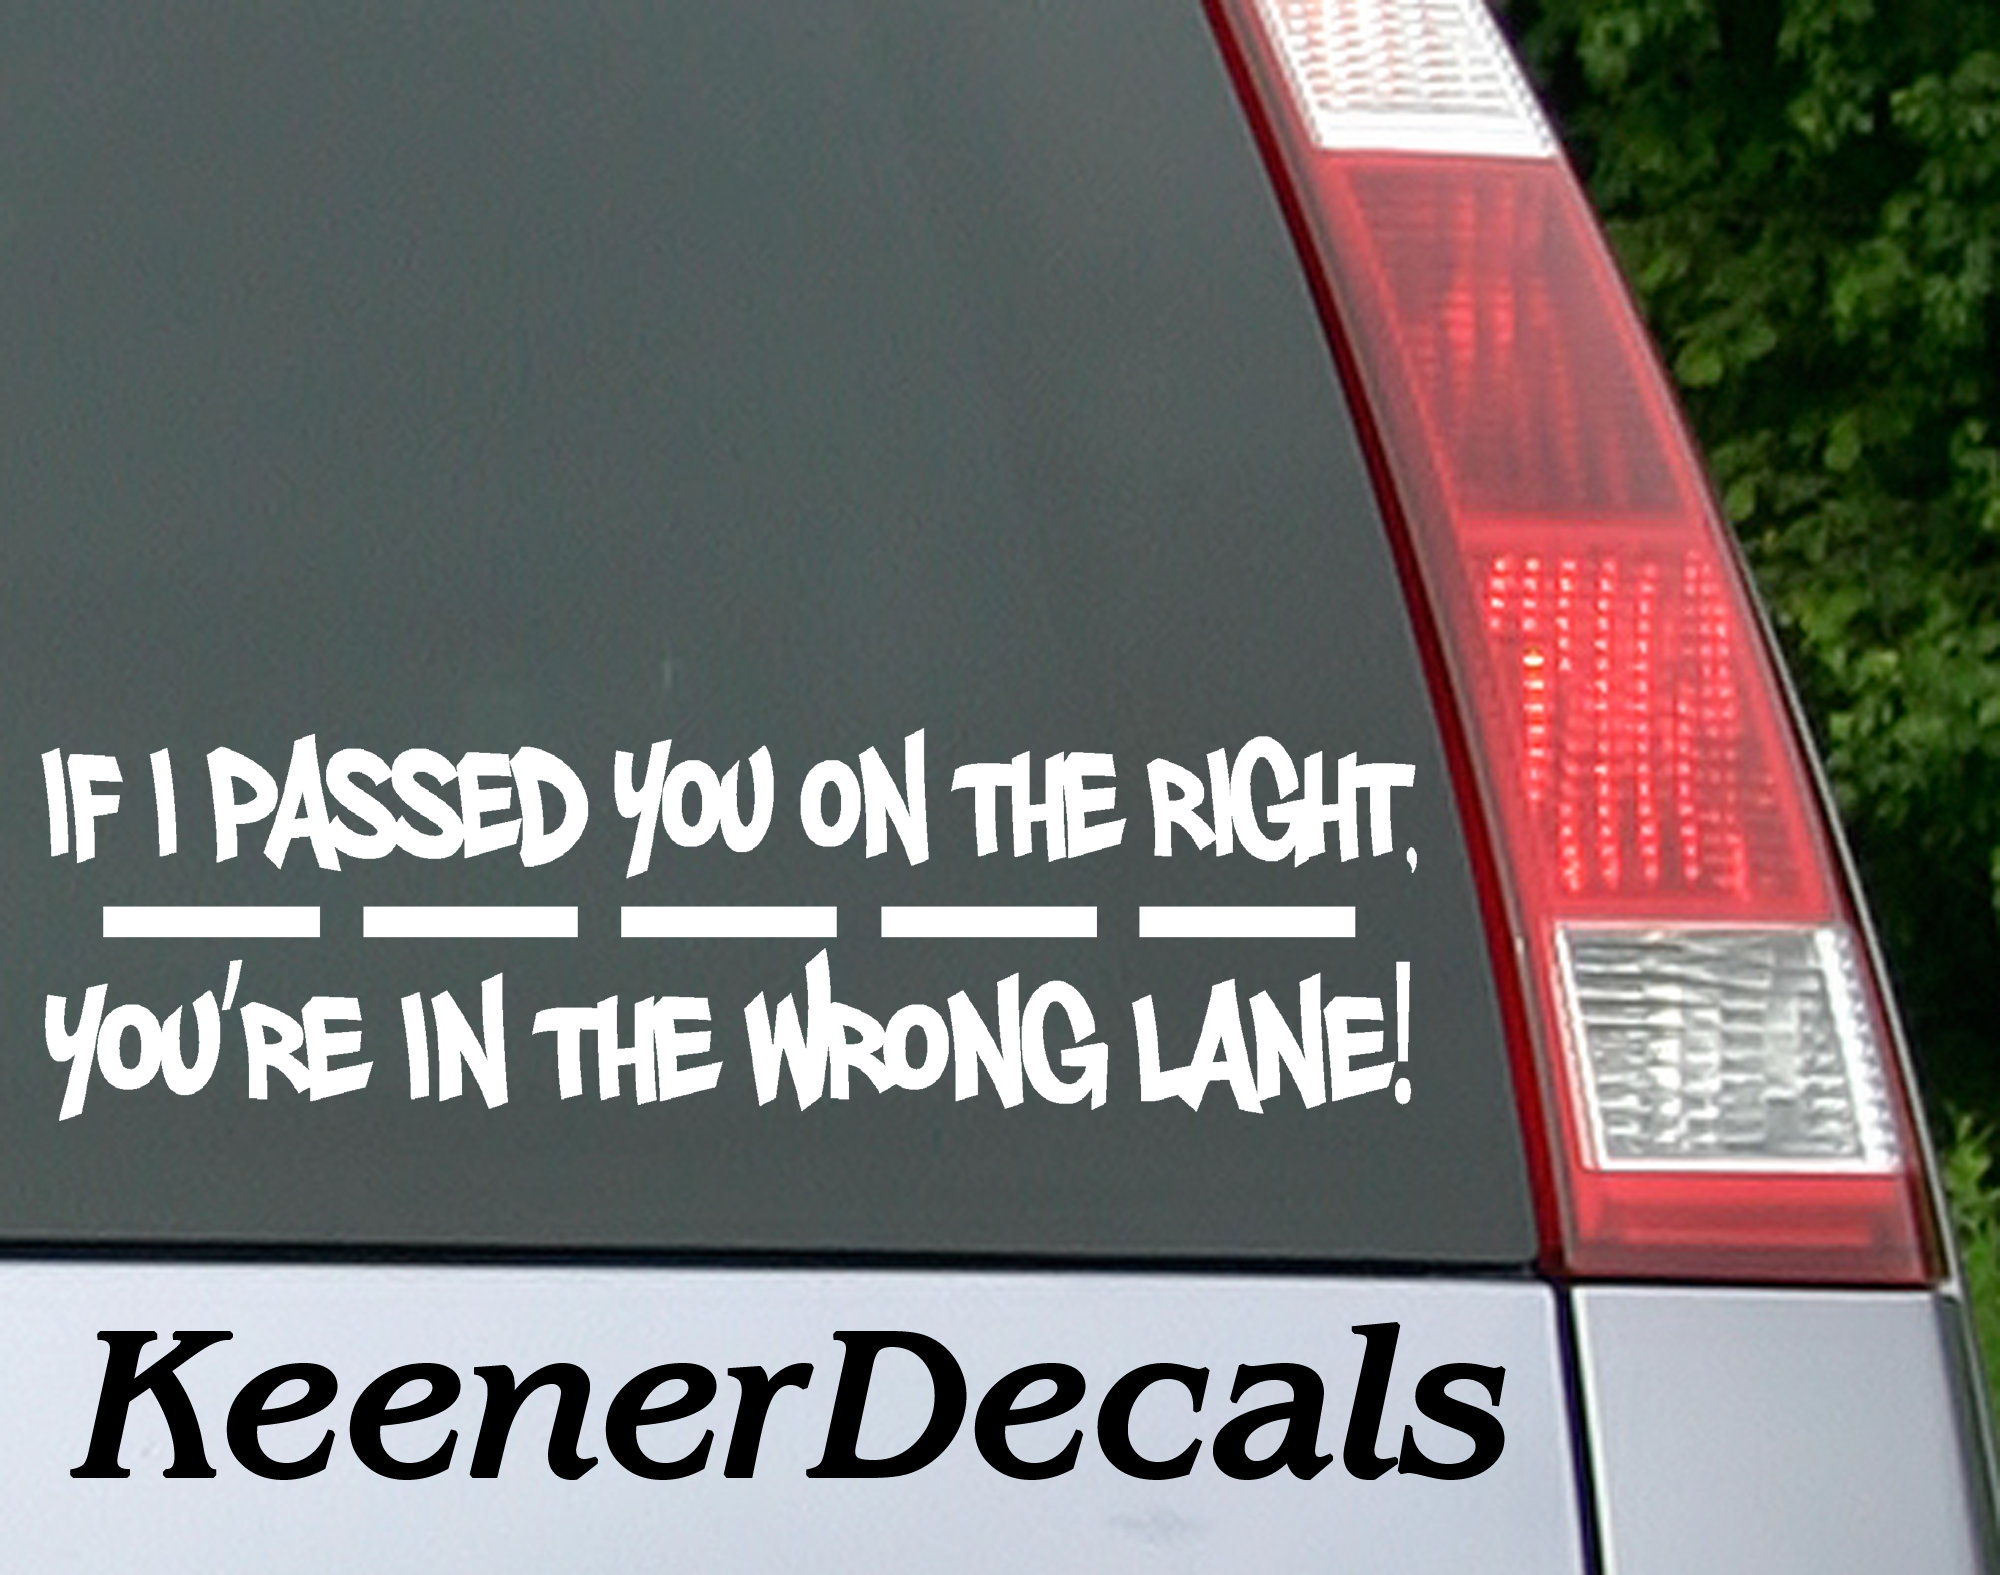 If I passed you on the right, you're in the wrong lane! Car Decal Bumper Sticker.  Some people need to know.  7.5"W x 2.5"H Vinyl Car Decal, Car Sticker, Car Vinyl, Bumper Sticker, Vinyl Stickers, Vinyl Sticker.